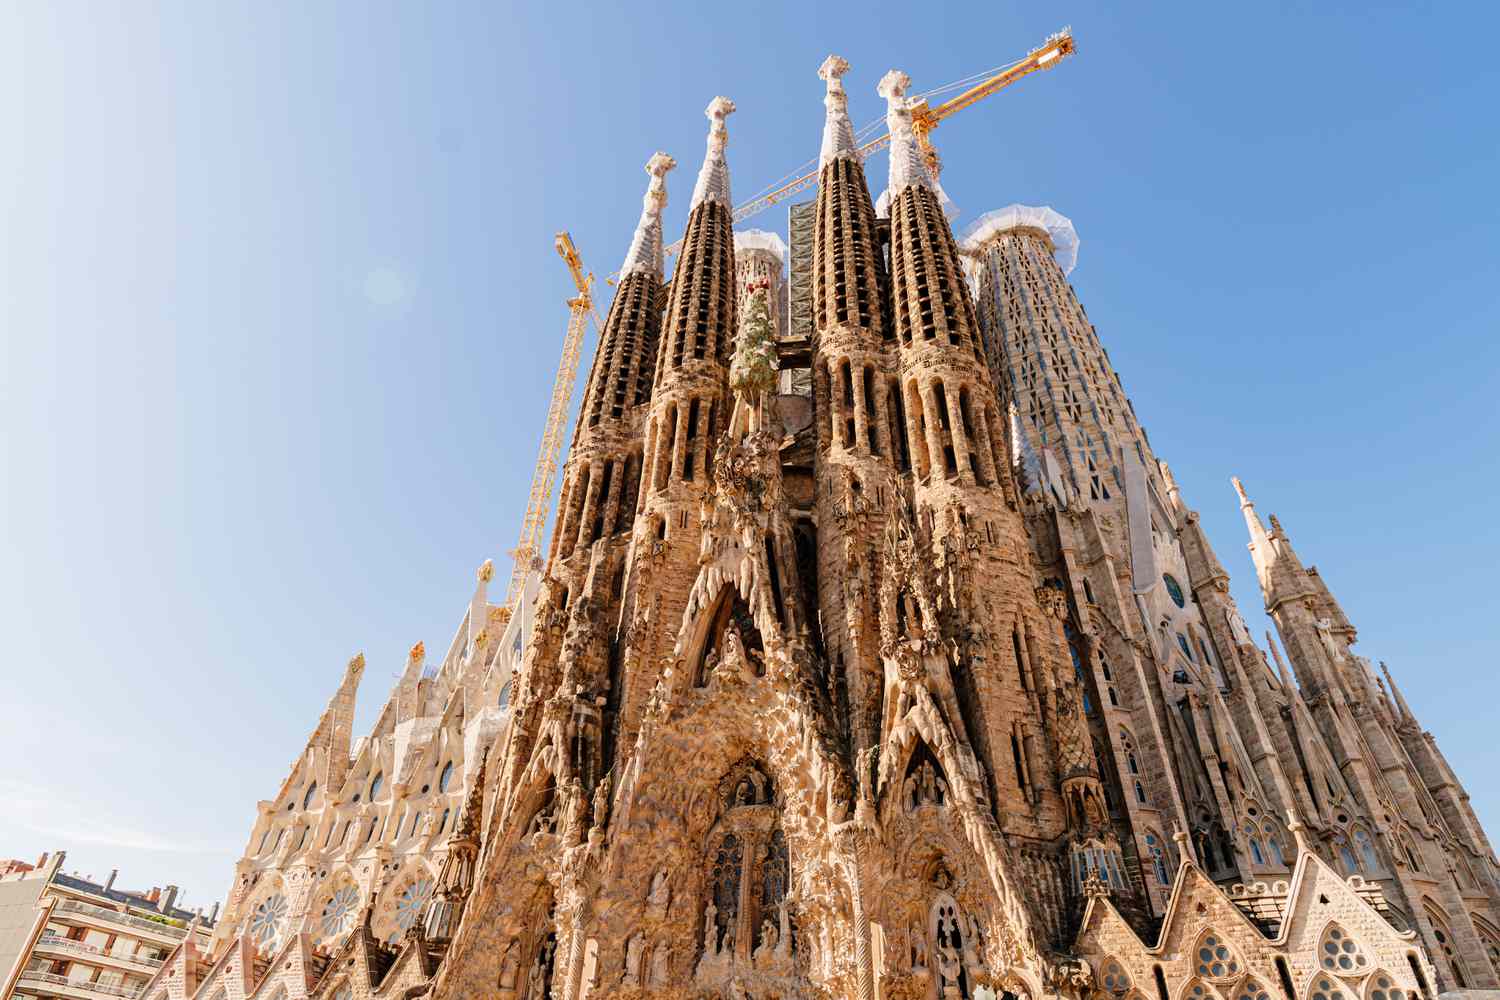 <p>is an unfinished church in the Eixample district of Barcelona, Catalonia, Spain. It is the largest unfinished Catholic church in the world. Designed by the Catalan architect Antoni Gaudí</p>